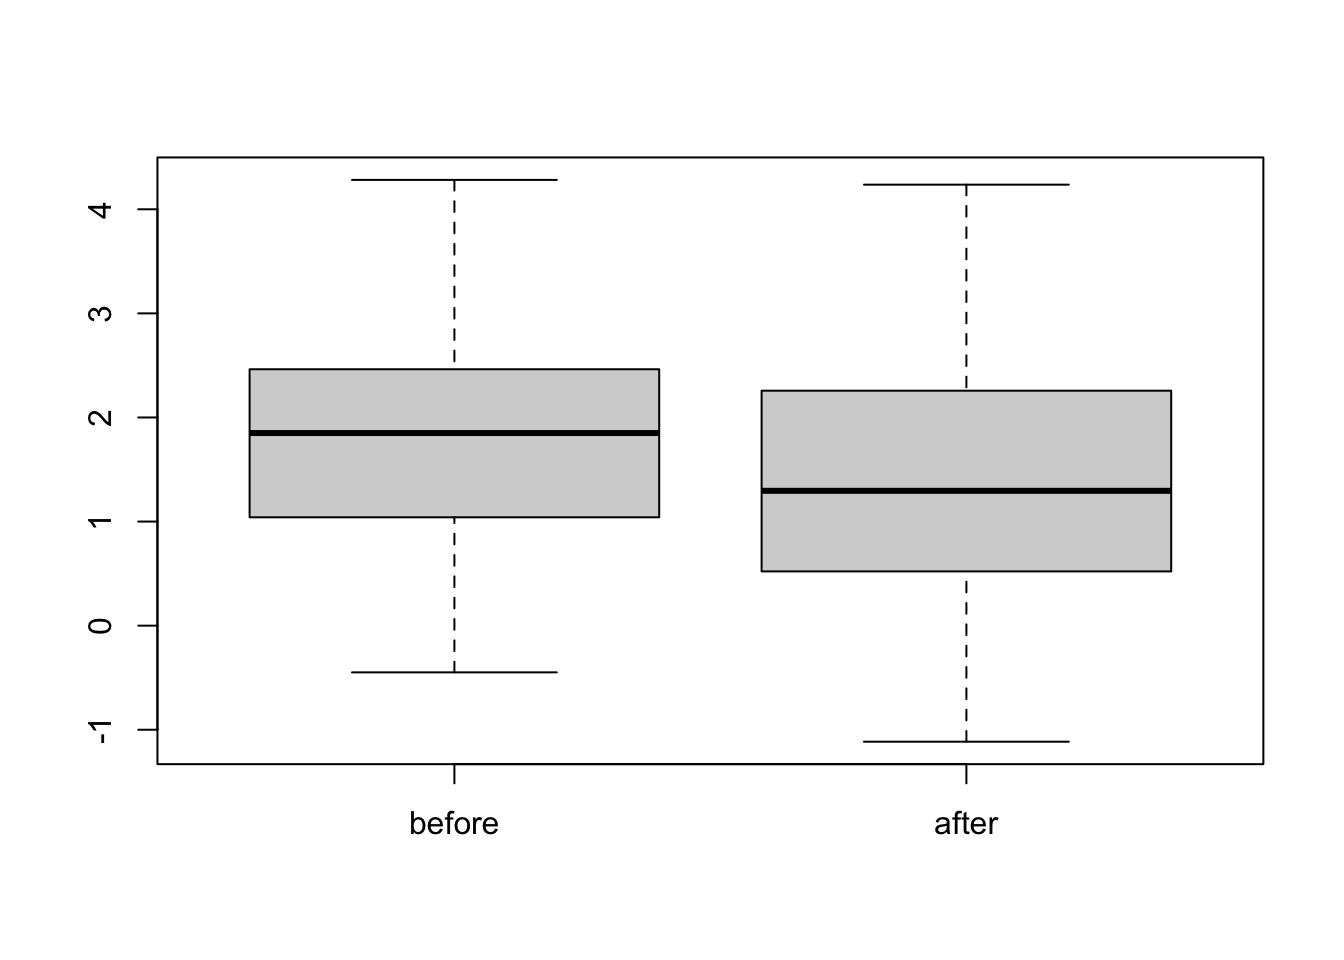 Boxplot of simulated paired data.